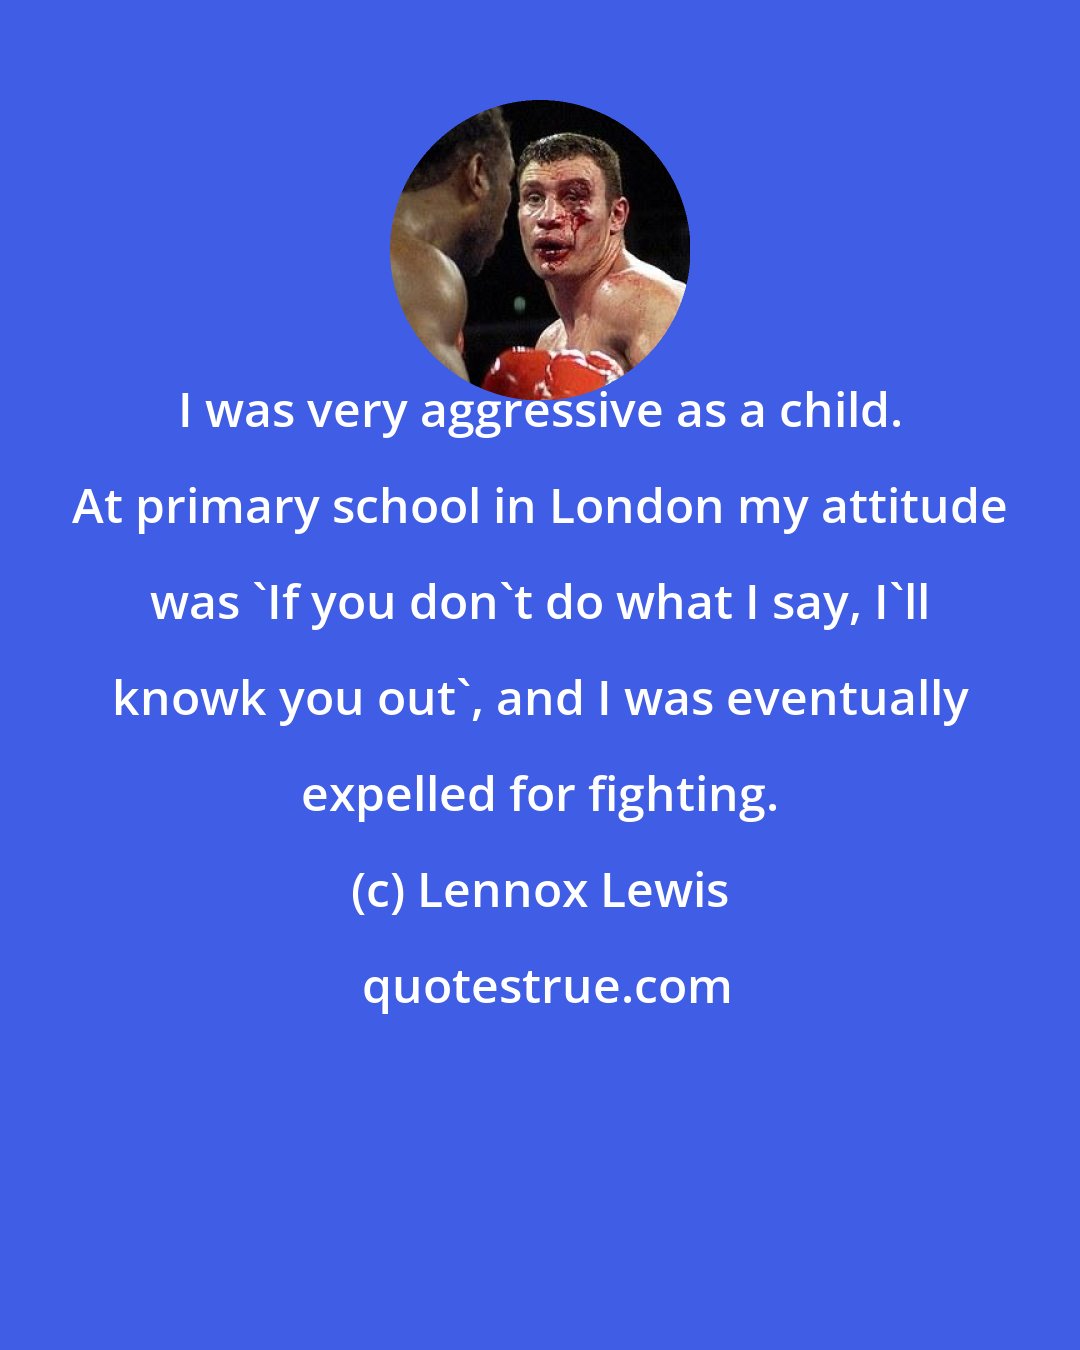 Lennox Lewis: I was very aggressive as a child. At primary school in London my attitude was 'If you don't do what I say, I'll knowk you out', and I was eventually expelled for fighting.